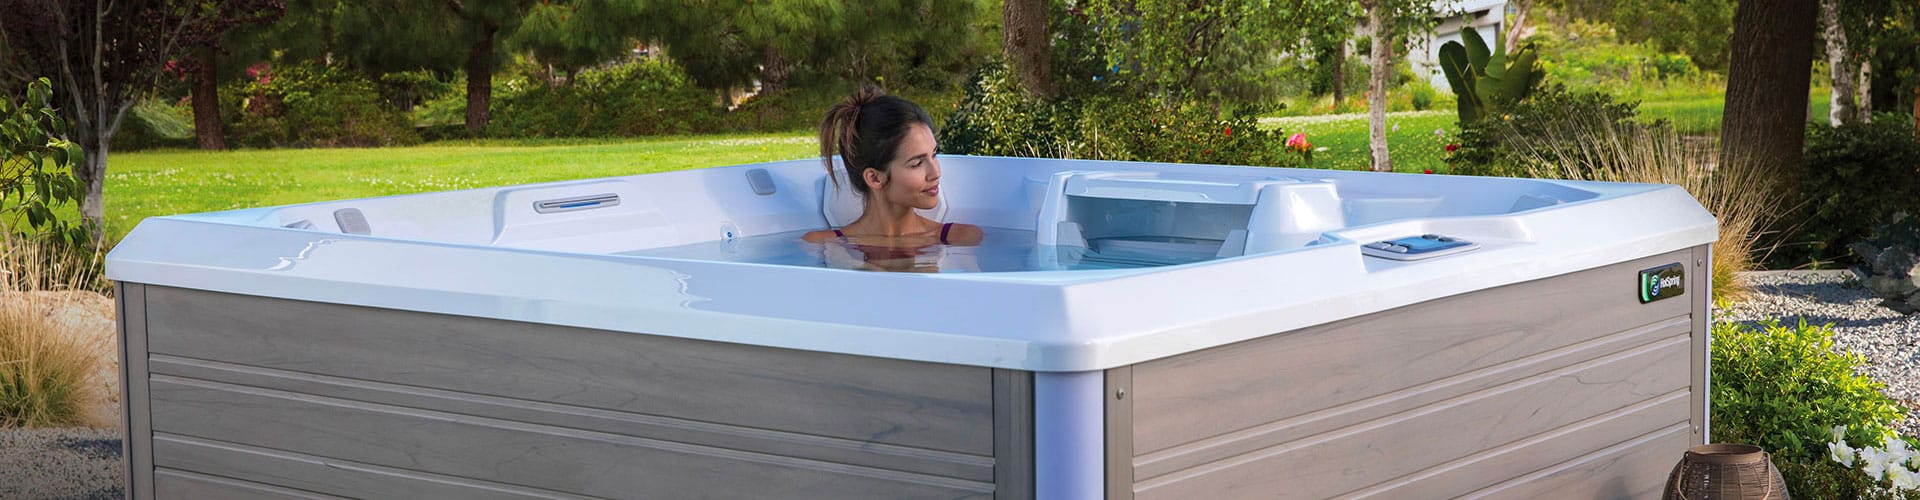 How to Choose a Hot Tub that’s Right for You